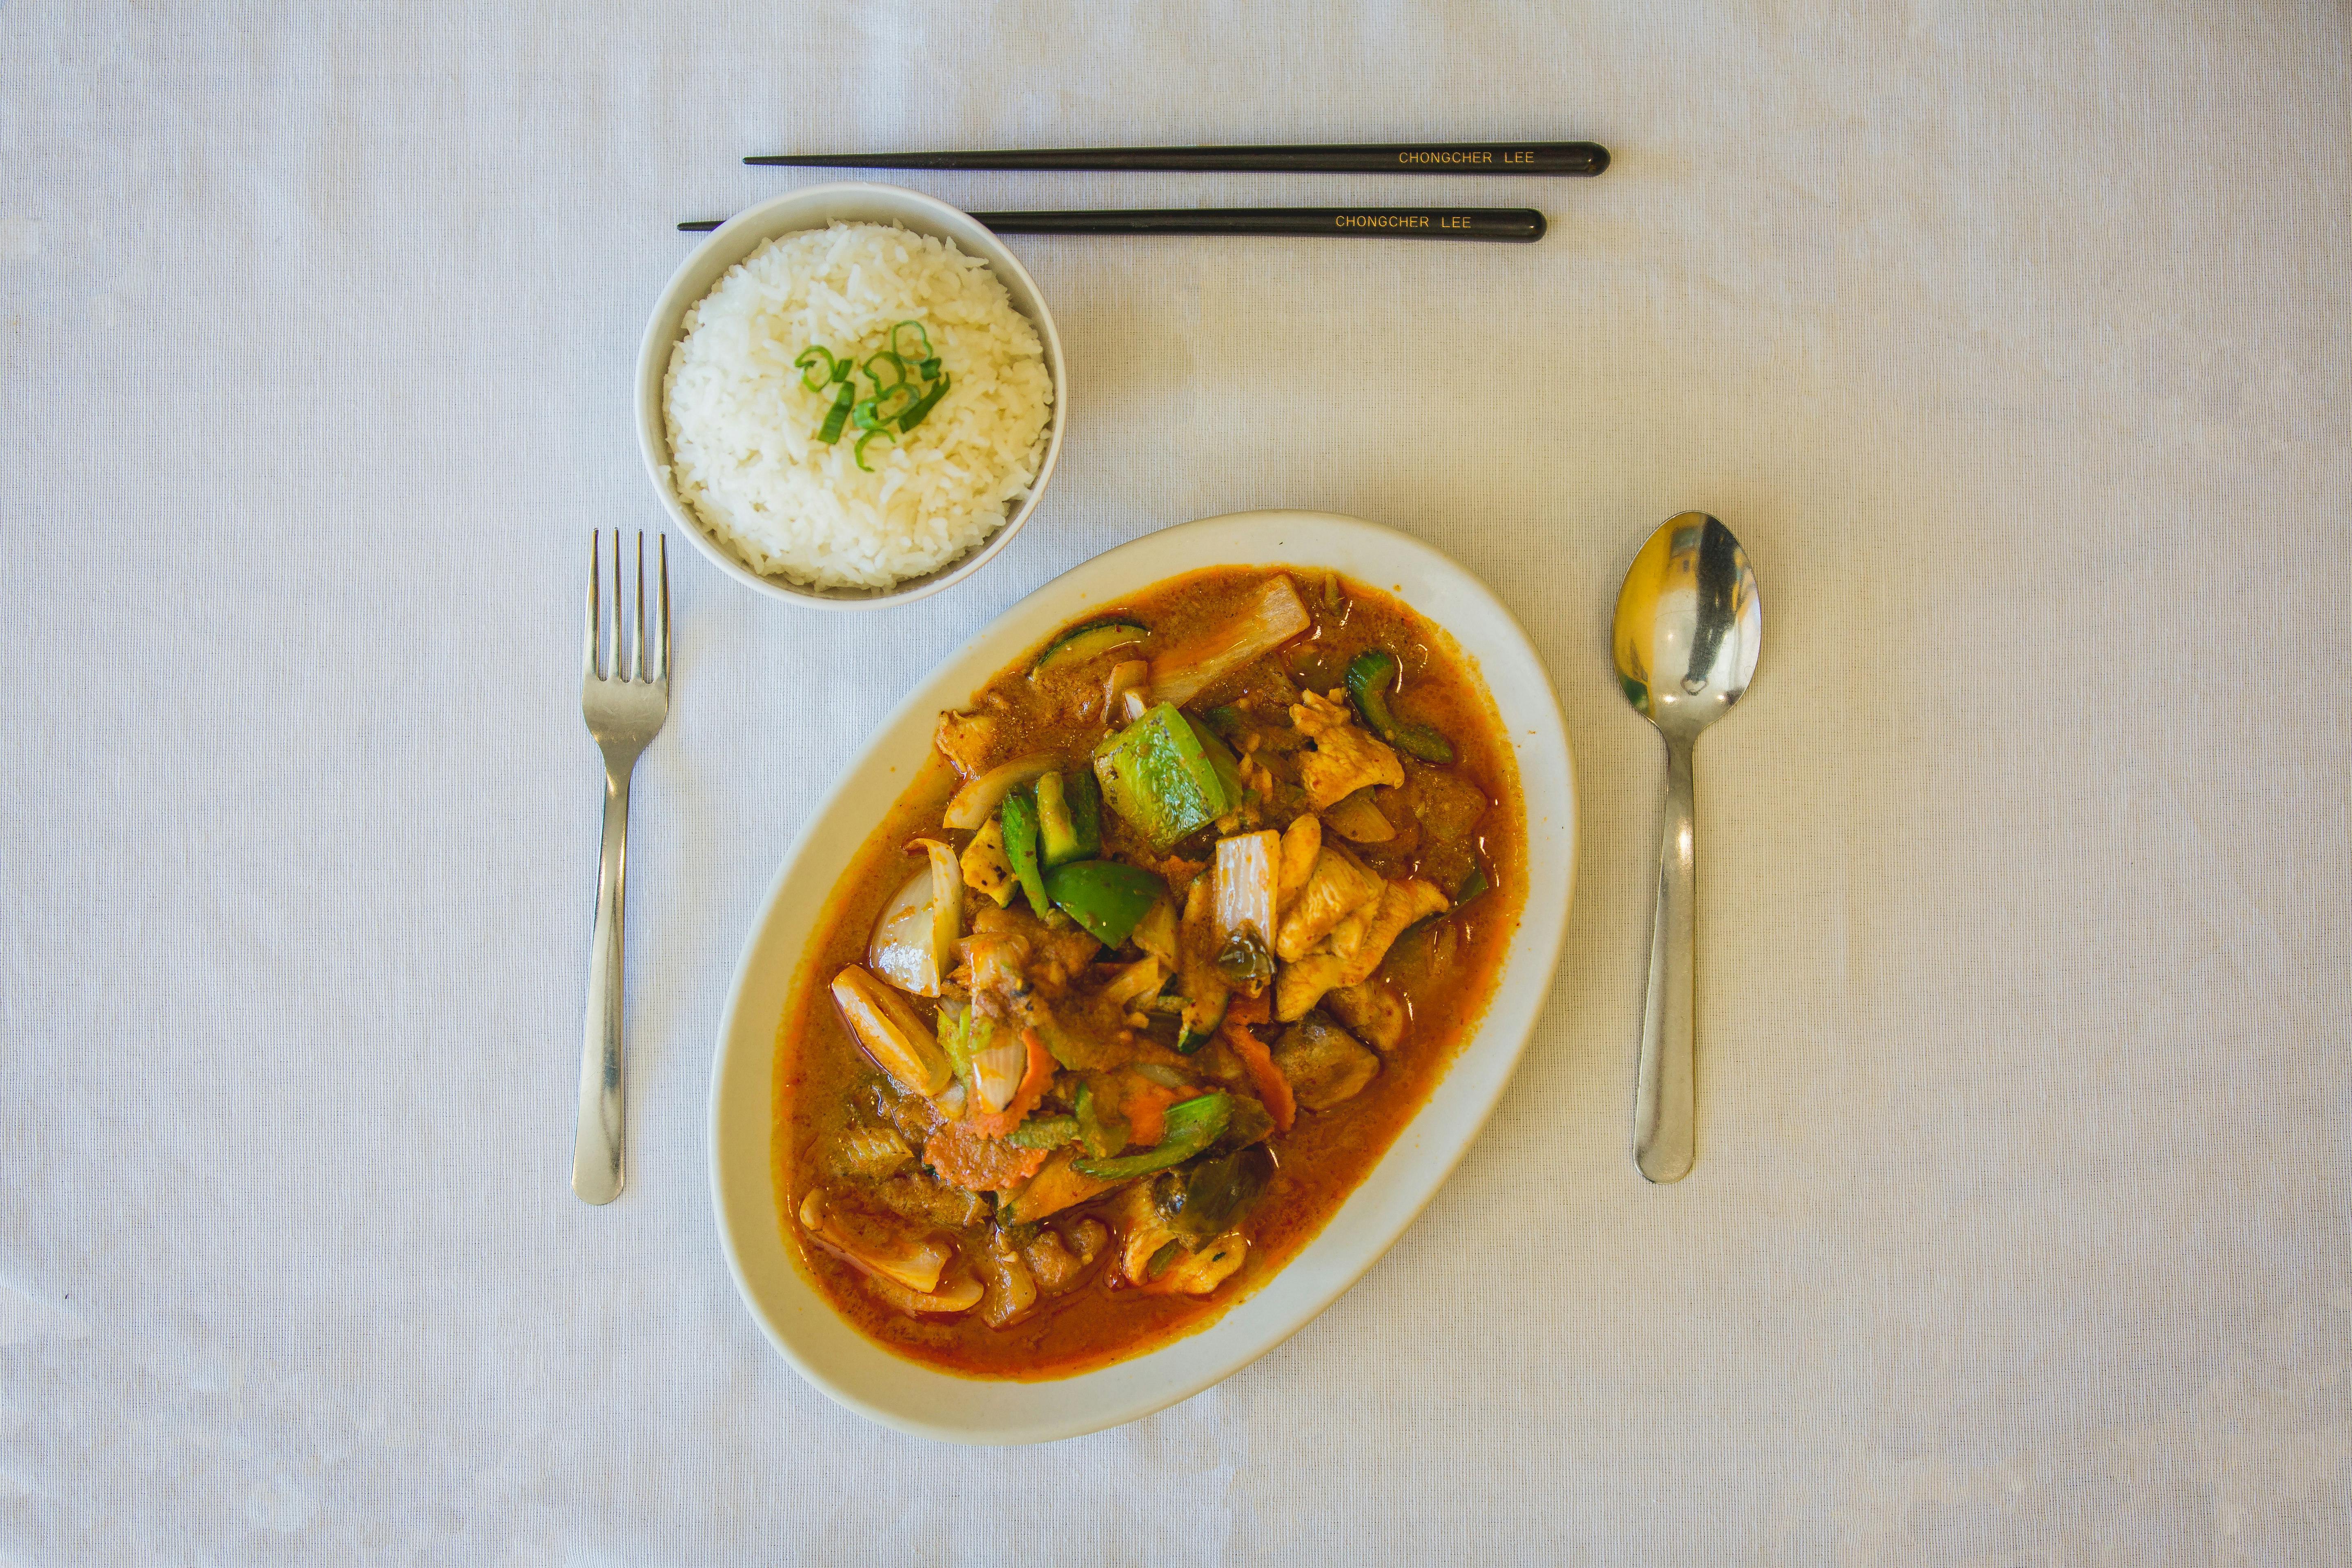 13. Red Curry from Hmong's Golden Egg Roll in La Crosse, WI